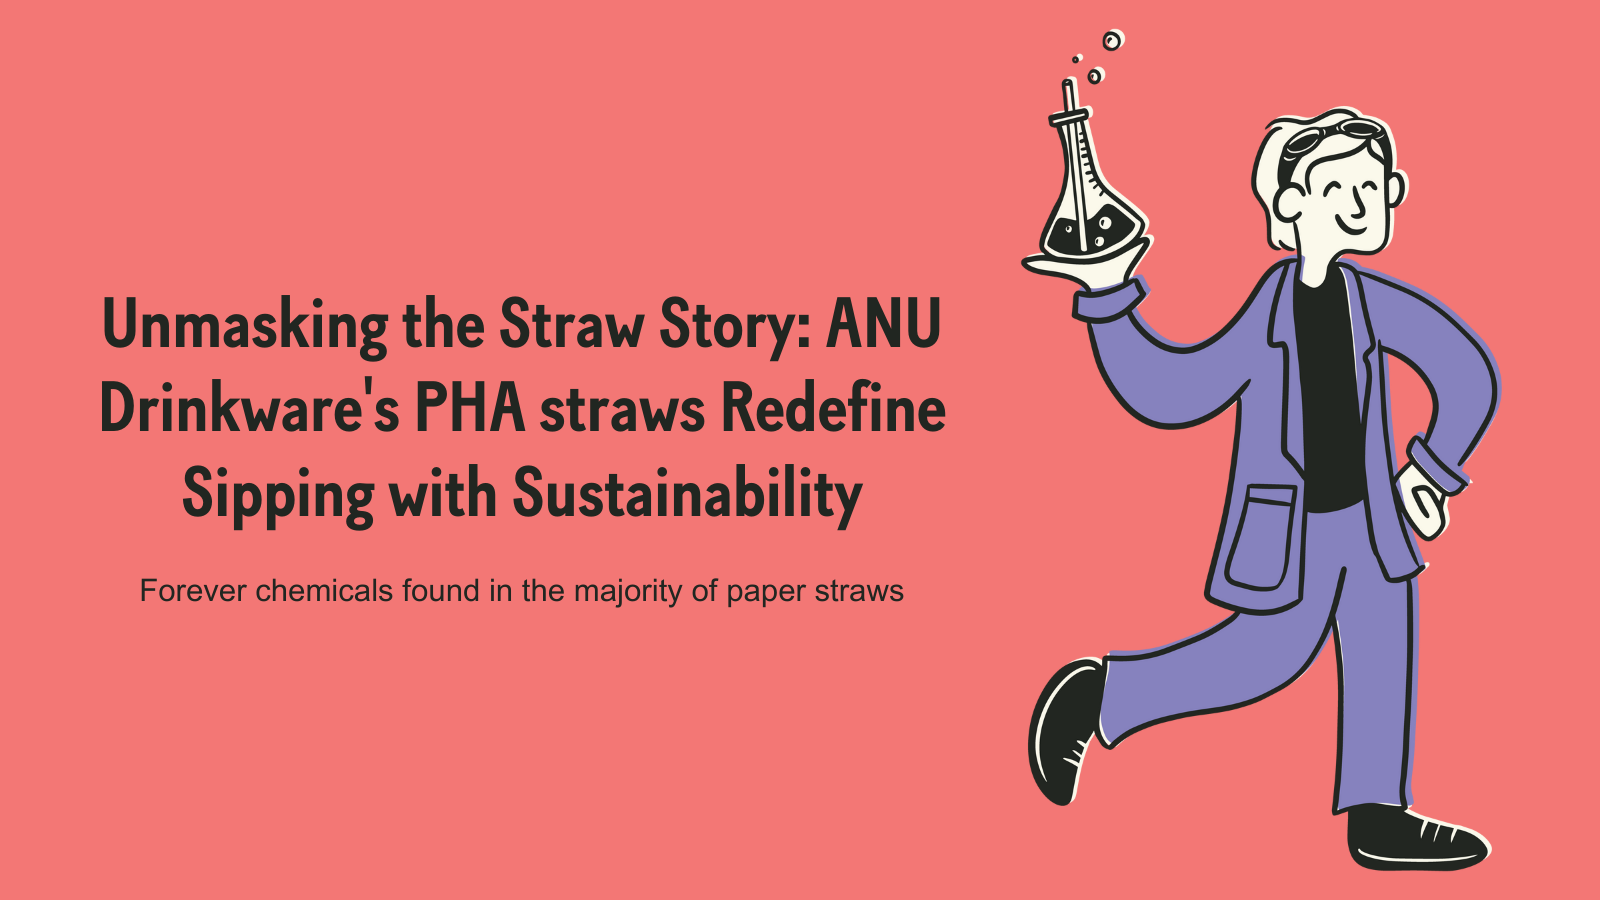 Unmasking the Straw Story: ANU Drinkware's PHA straws Redefine Sipping with Sustainability